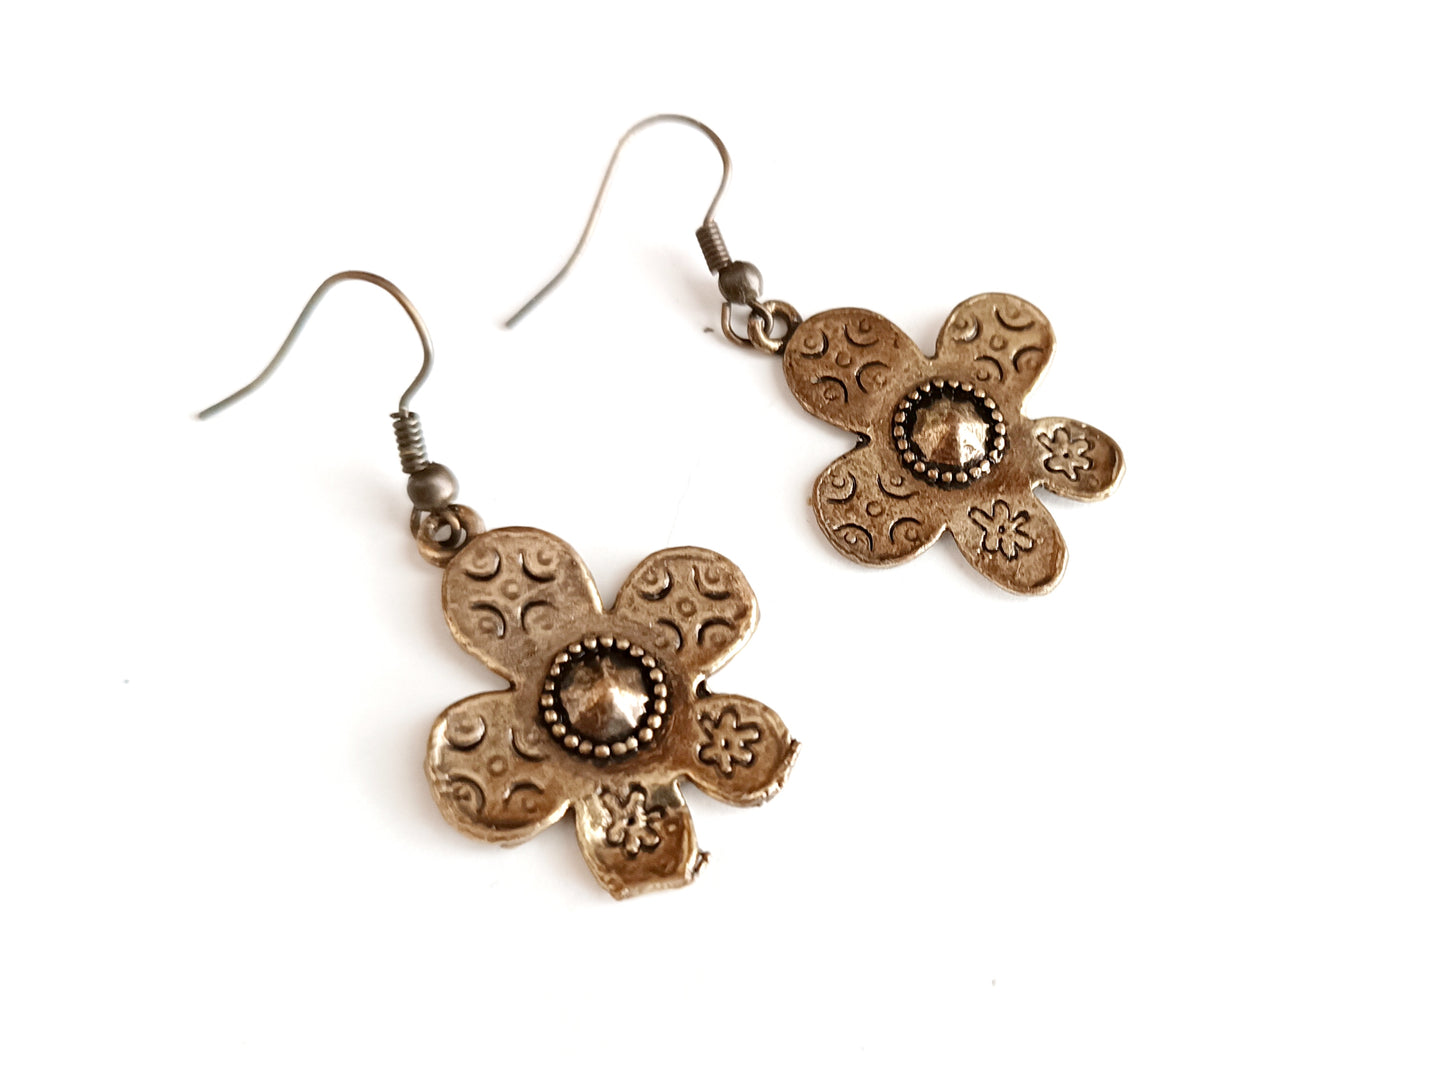 Hippie earrings with boho style daisies